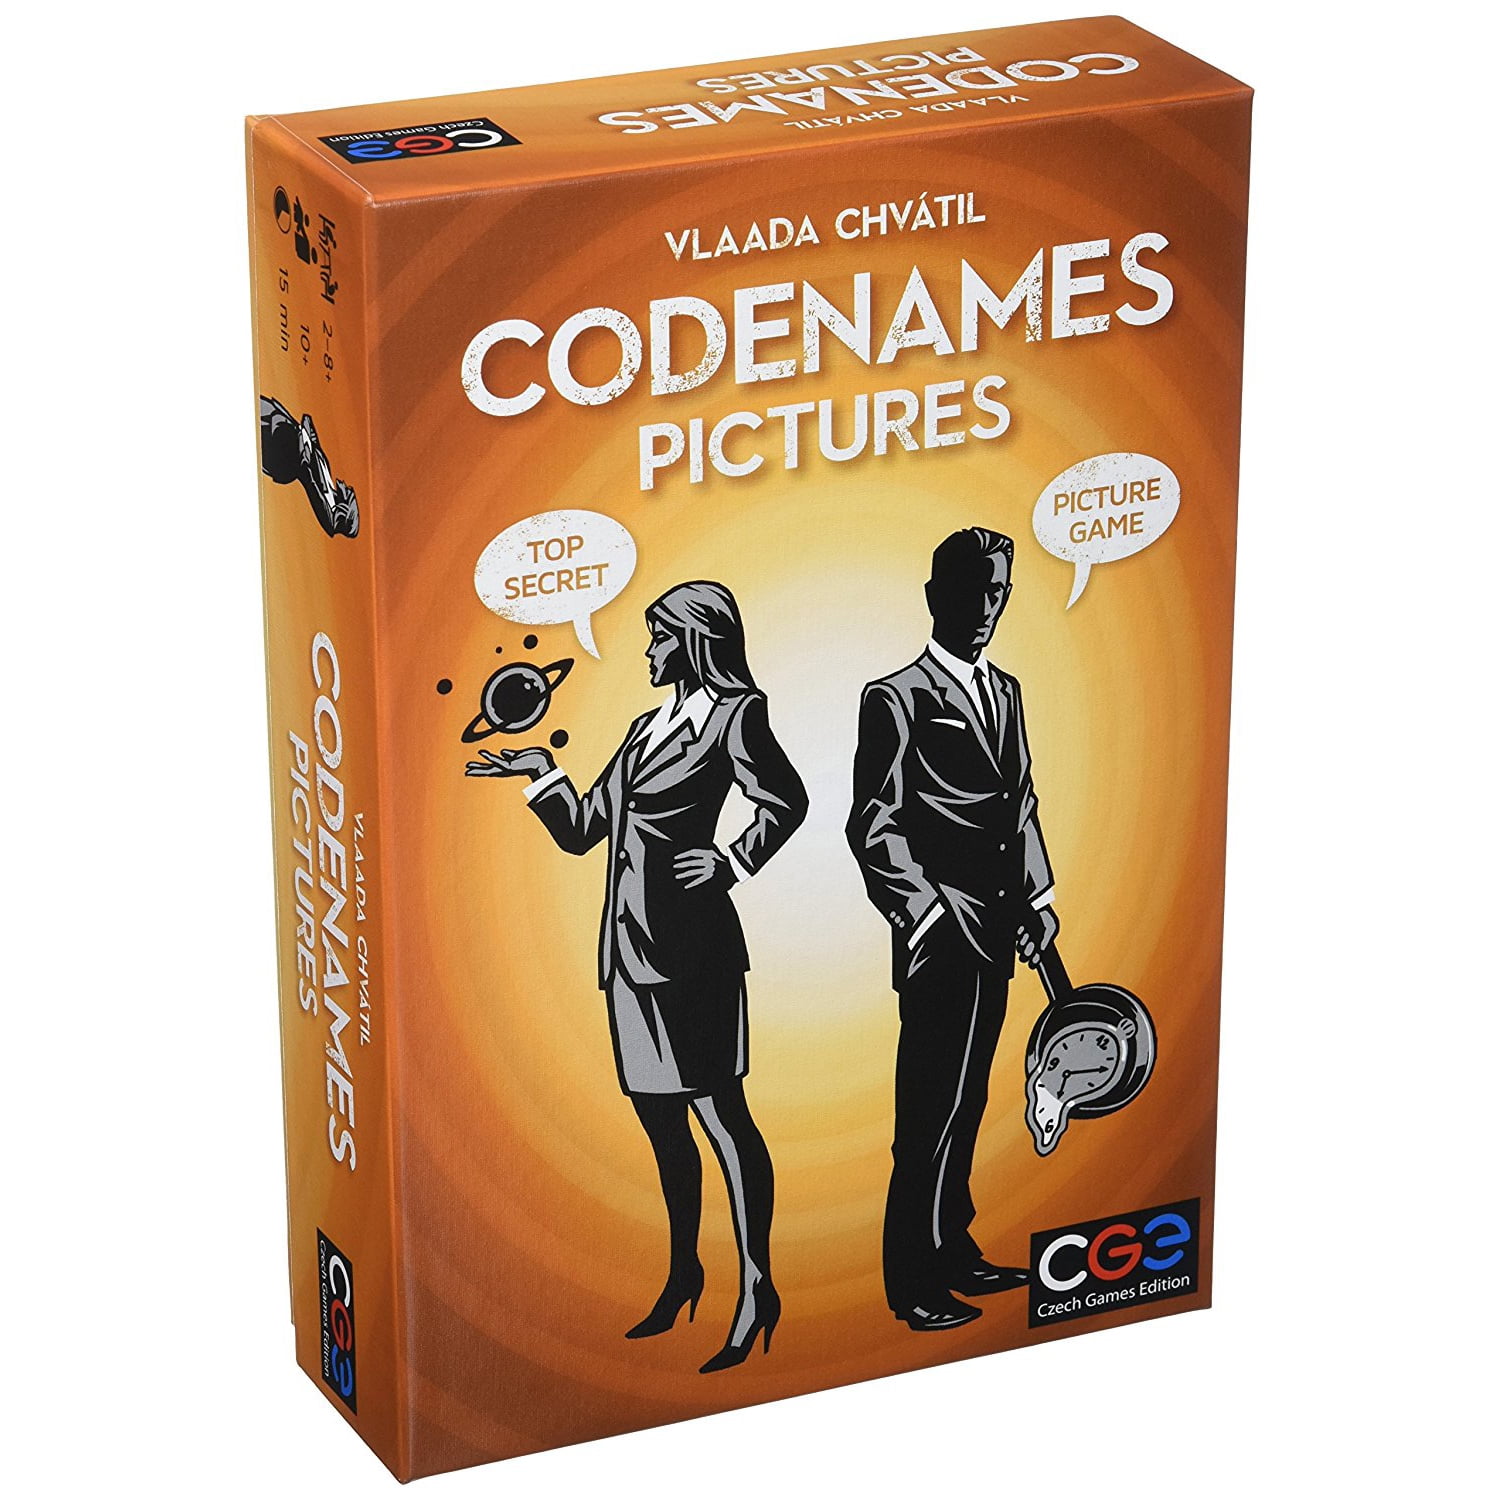 Codenames Pictures Edition Board Game, by Czech Games